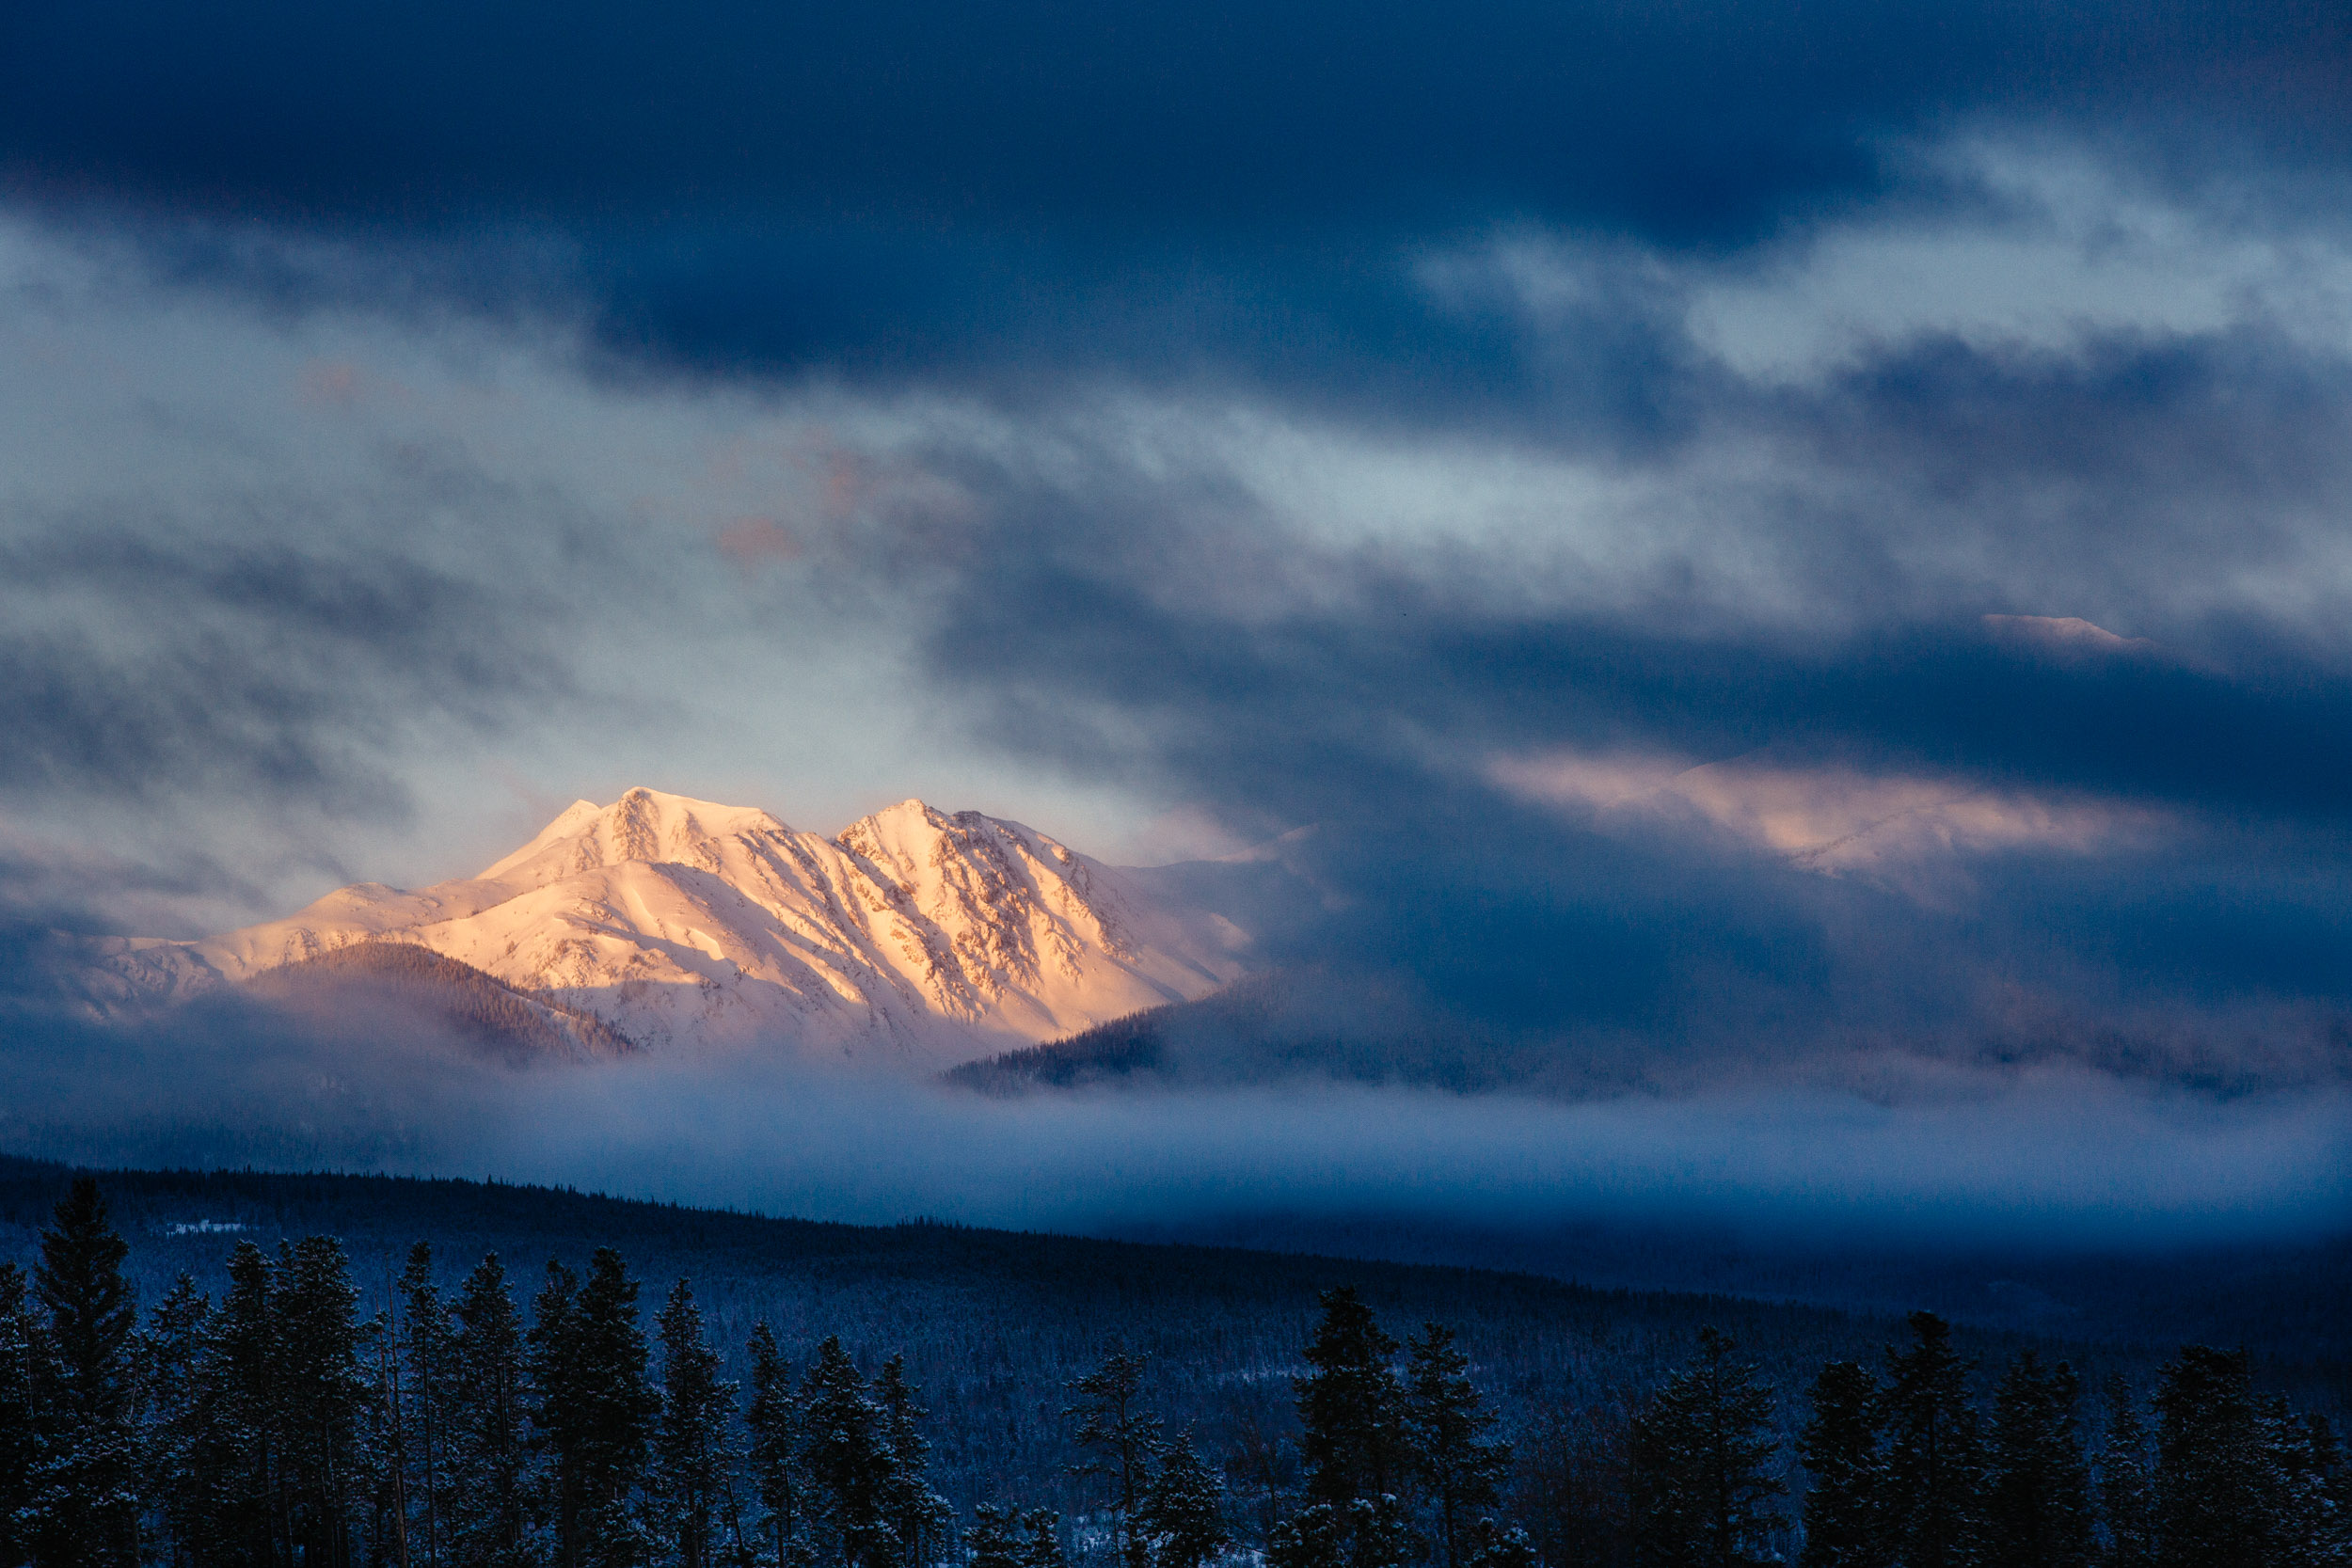 Byers peak at sunrise after a snowstorm, lit while area rocky mountains remain in the shade